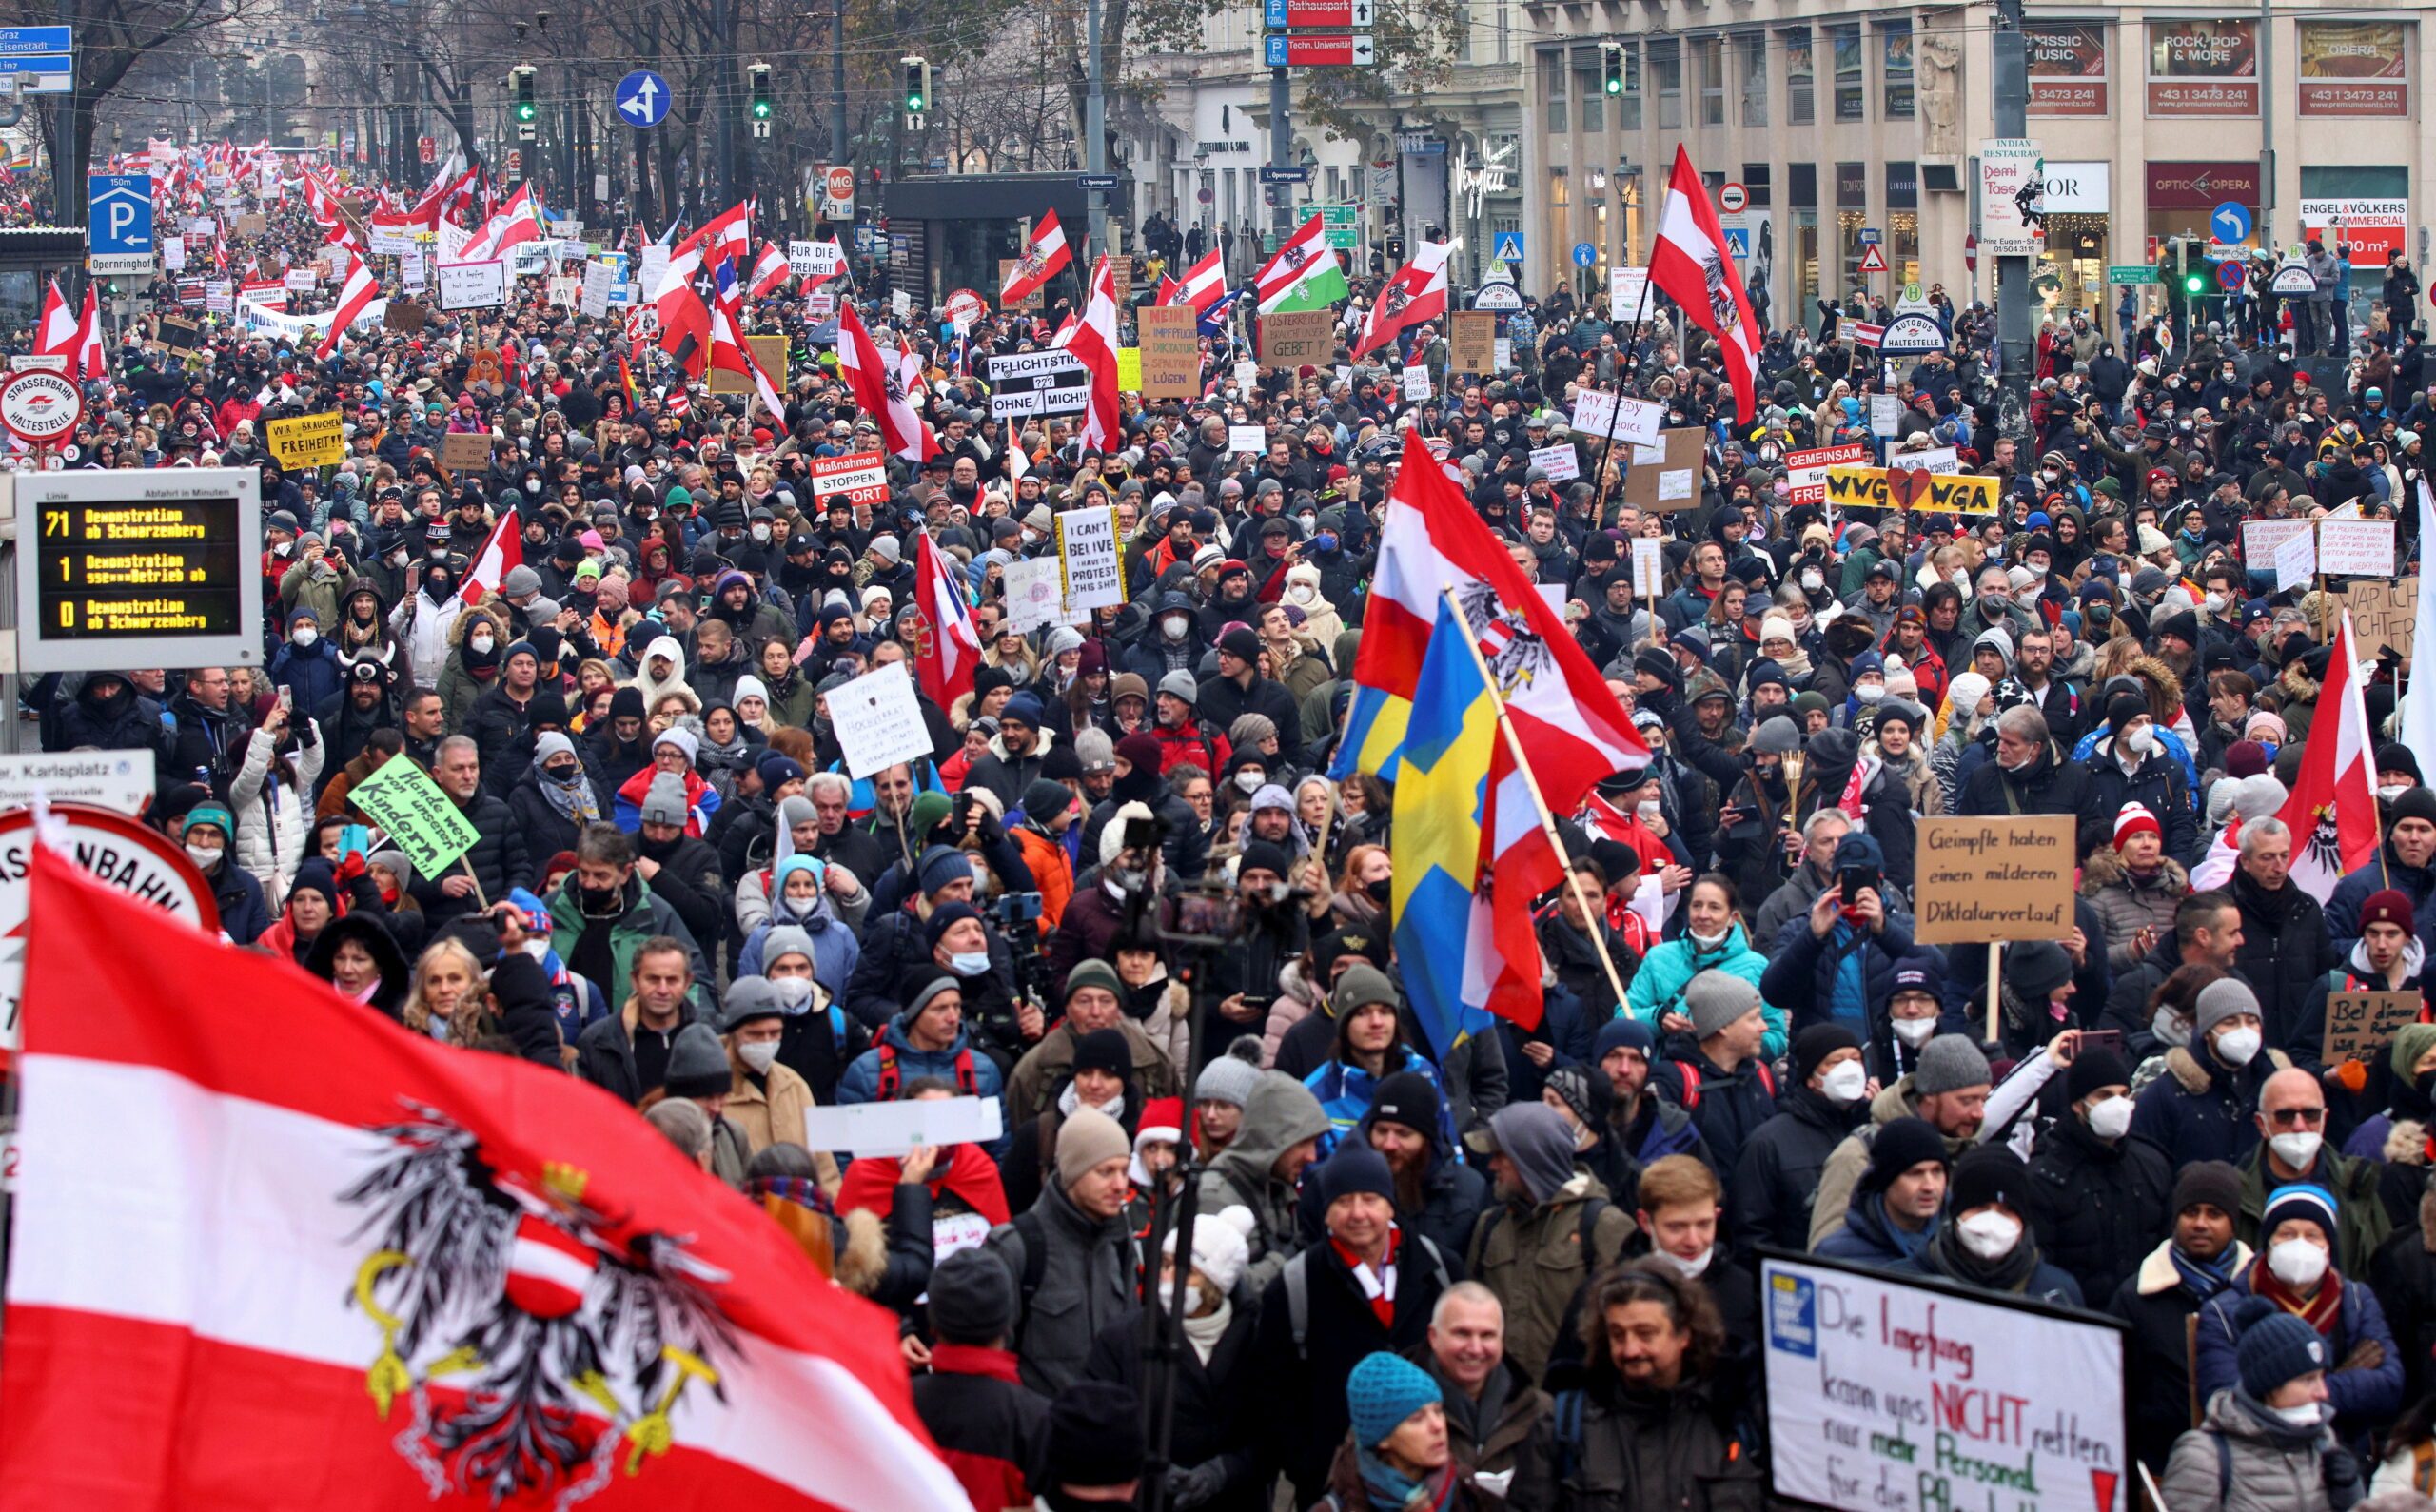 Mass protest in Vienna against Austria’s controversial COVID-19 restrictions